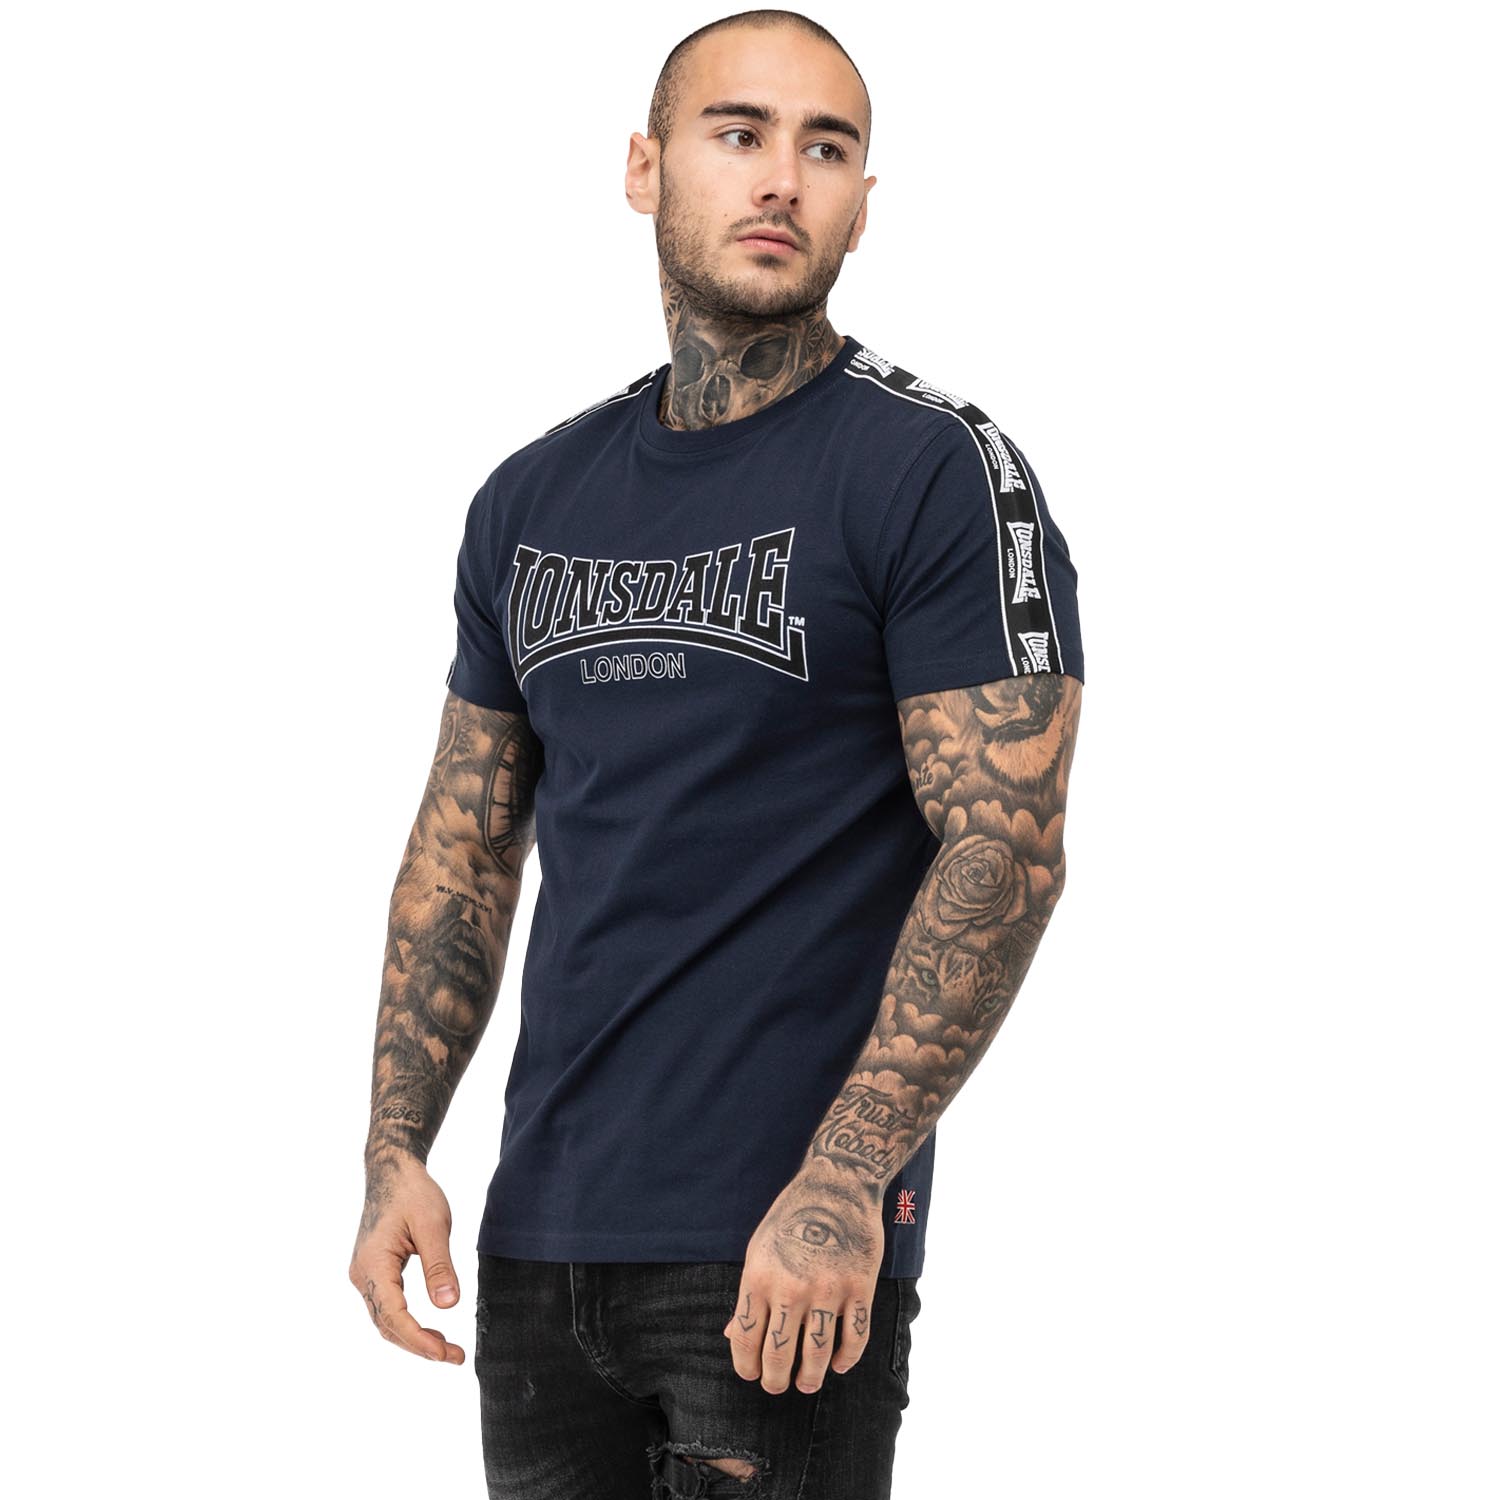 Lonsdale T-Shirt, Vementry, navy